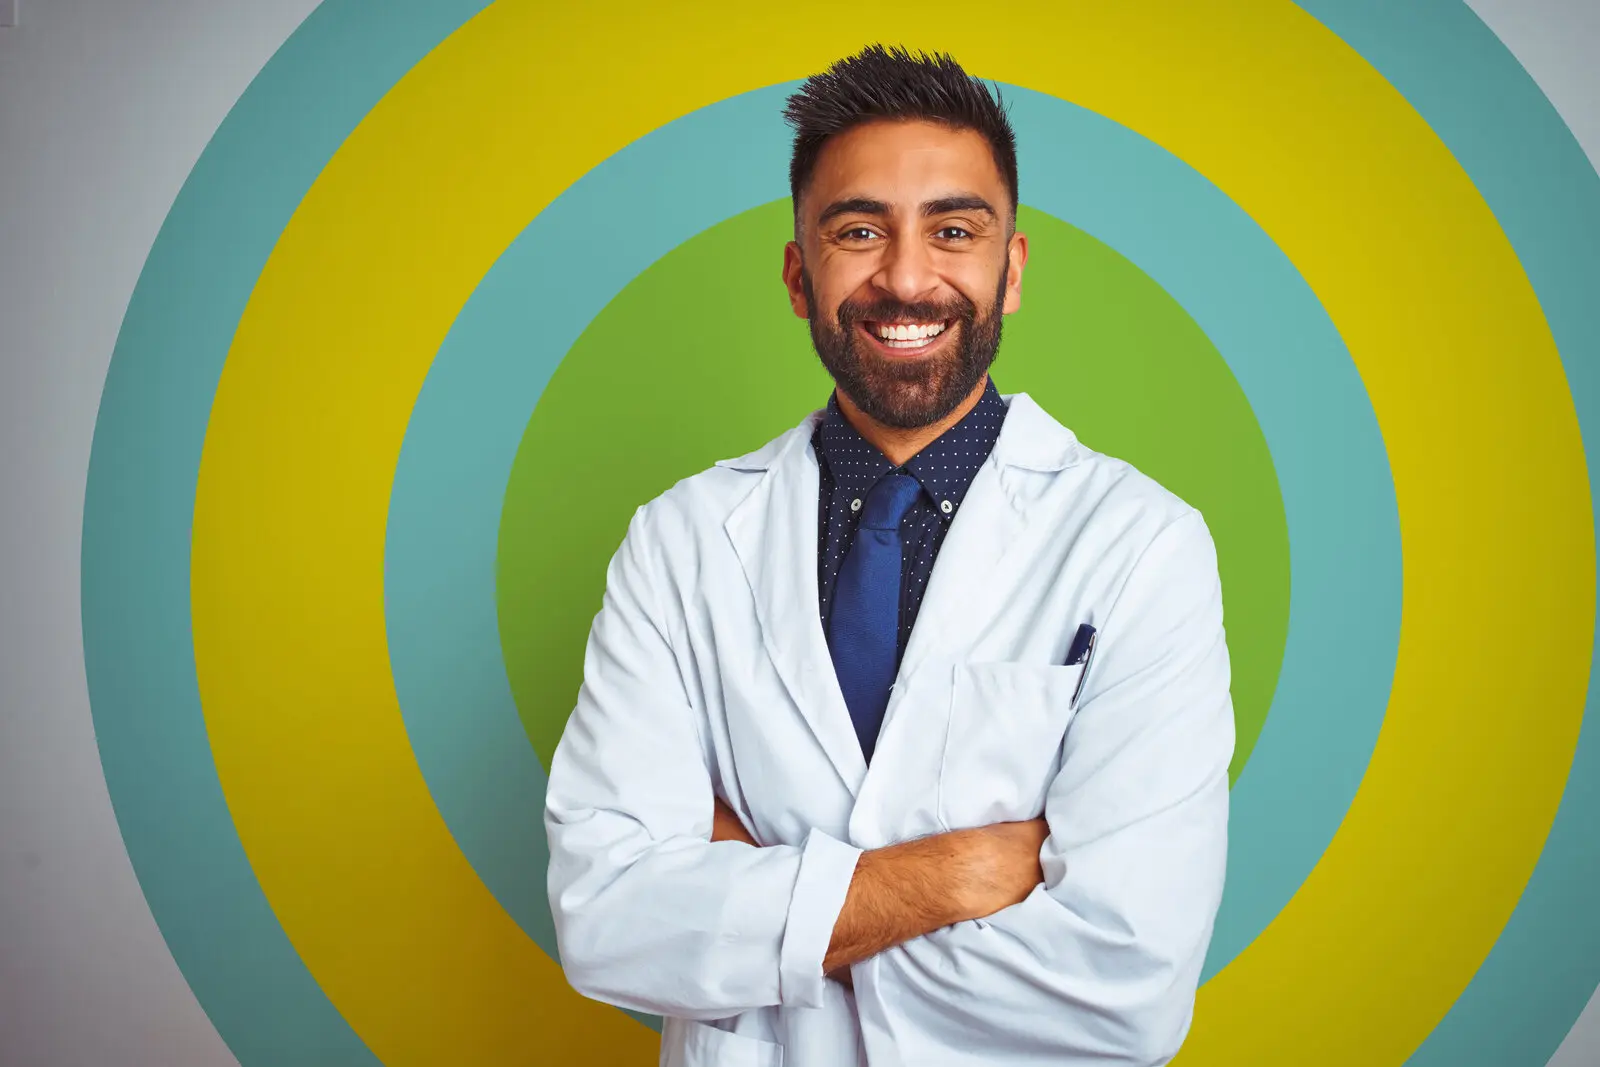 Young indian doctor man standing over isolated white background happy face smiling with crossed arms looking at the camera. Positive person.